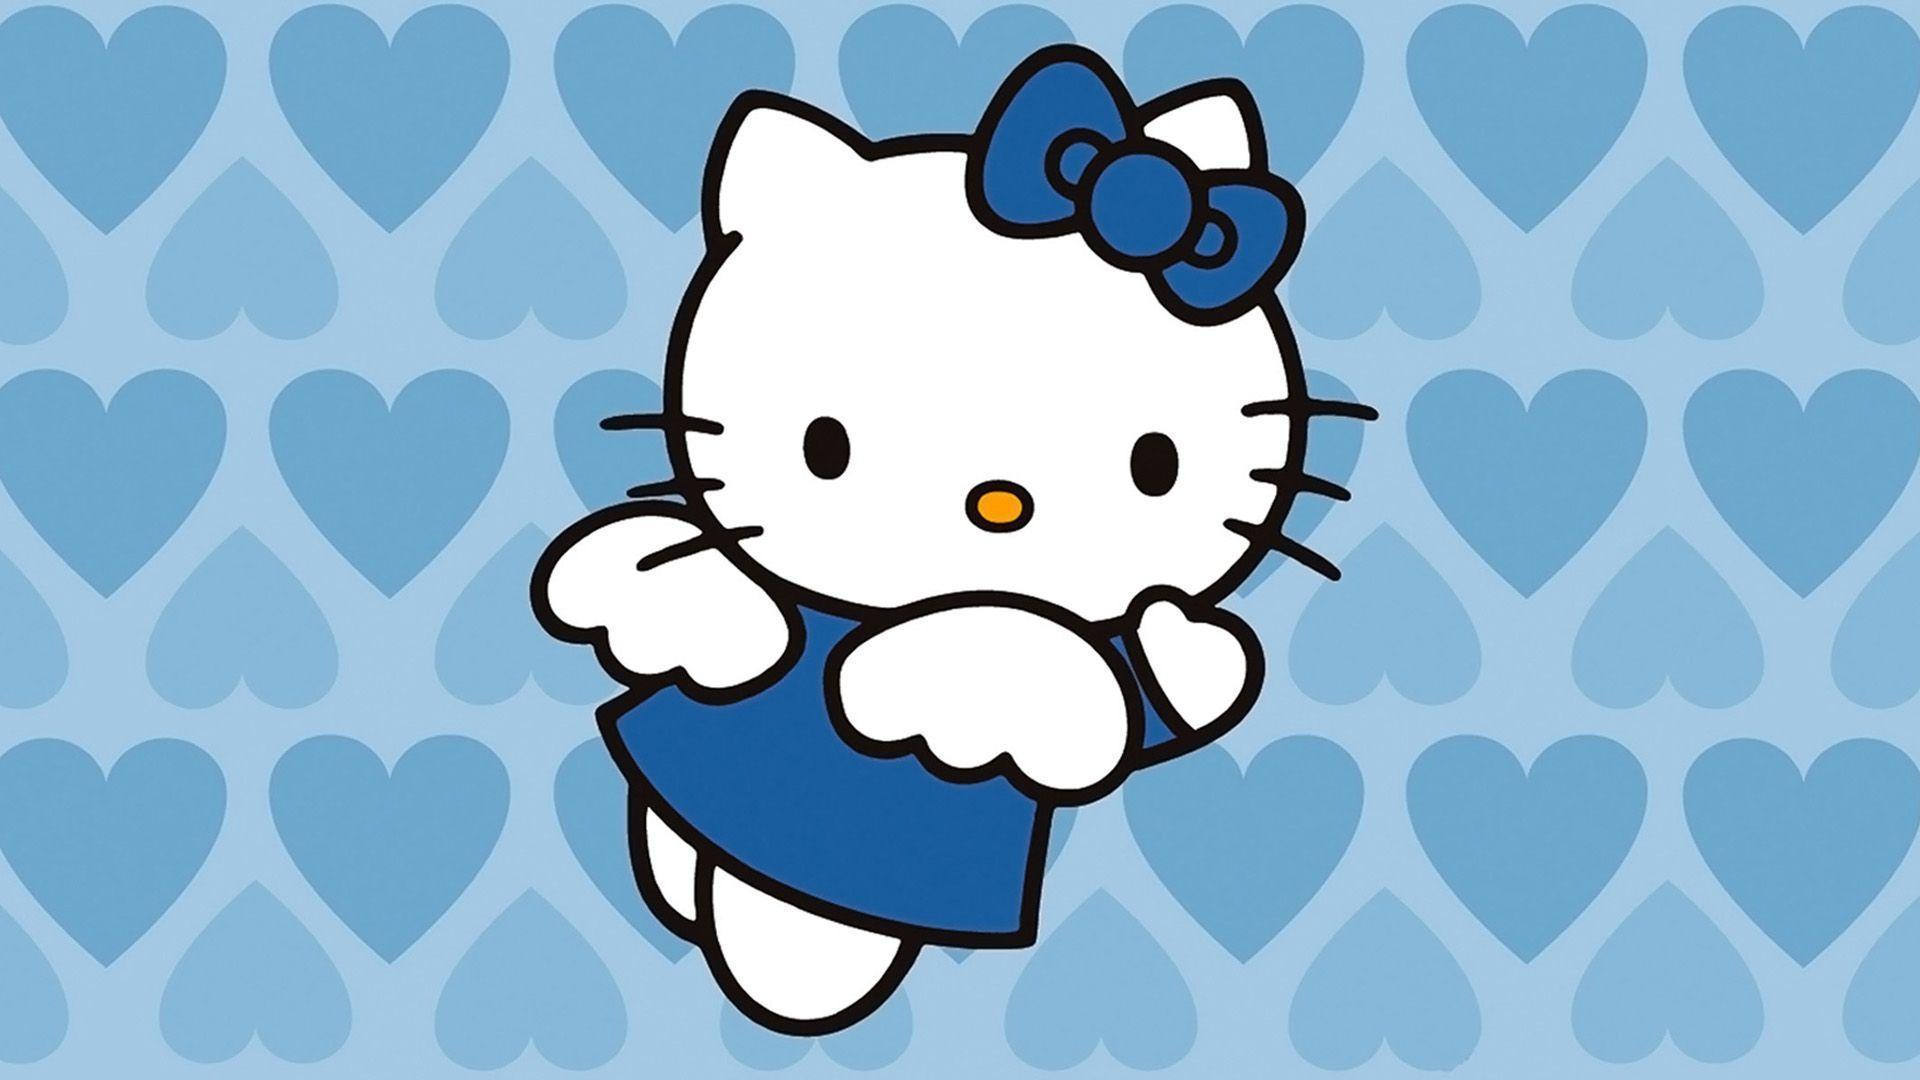 Download Free Hello Kitty Wallcapture Wallpapers 1920x1080